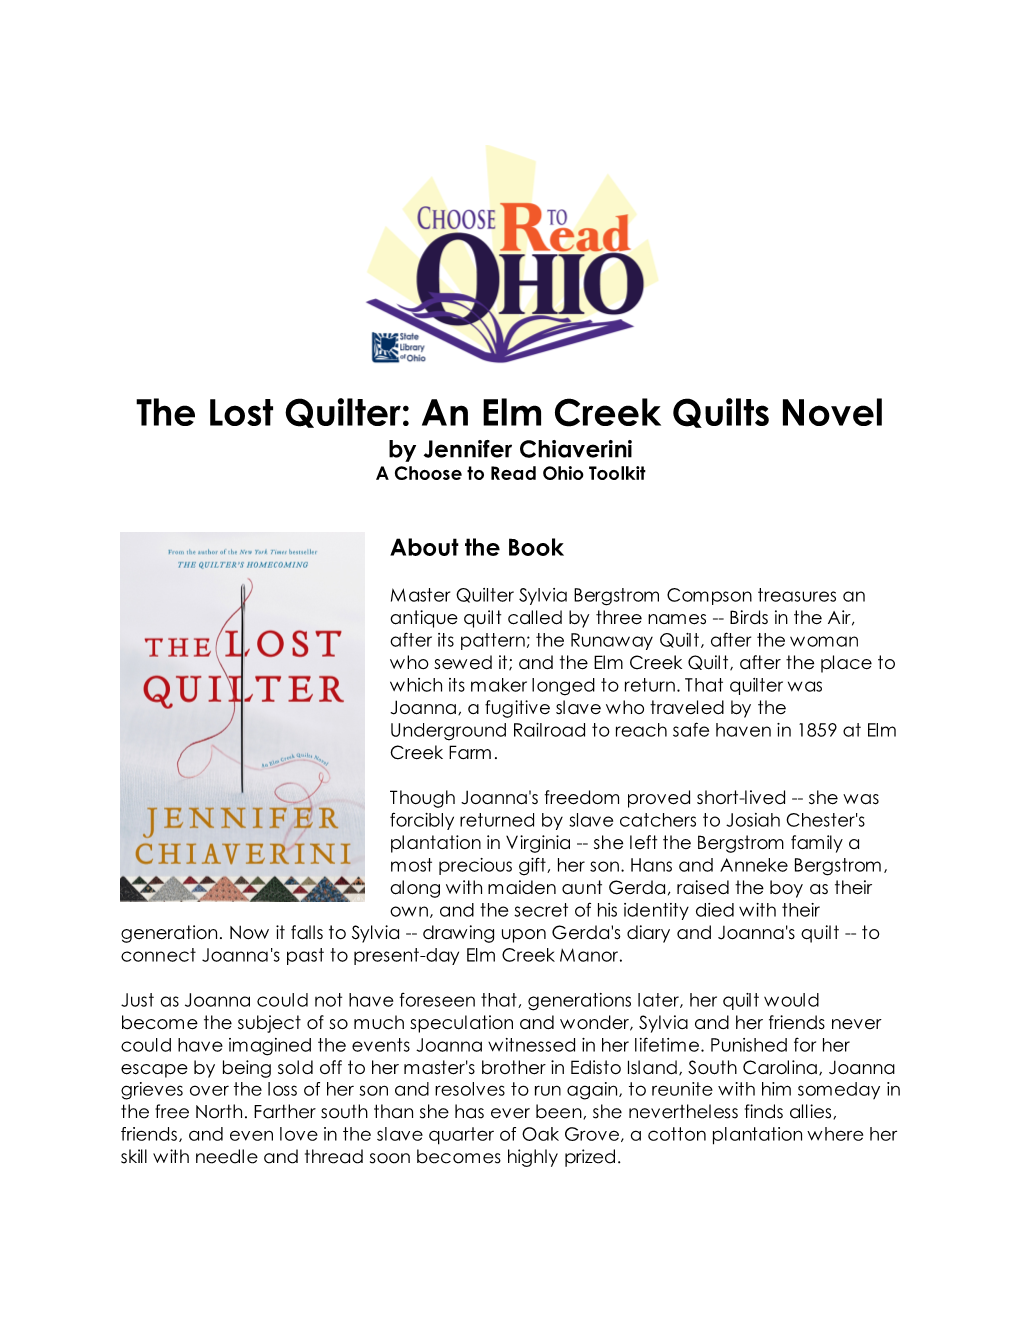 The Lost Quilter: an Elm Creek Quilts Novel by Jennifer Chiaverini a Choose to Read Ohio Toolkit